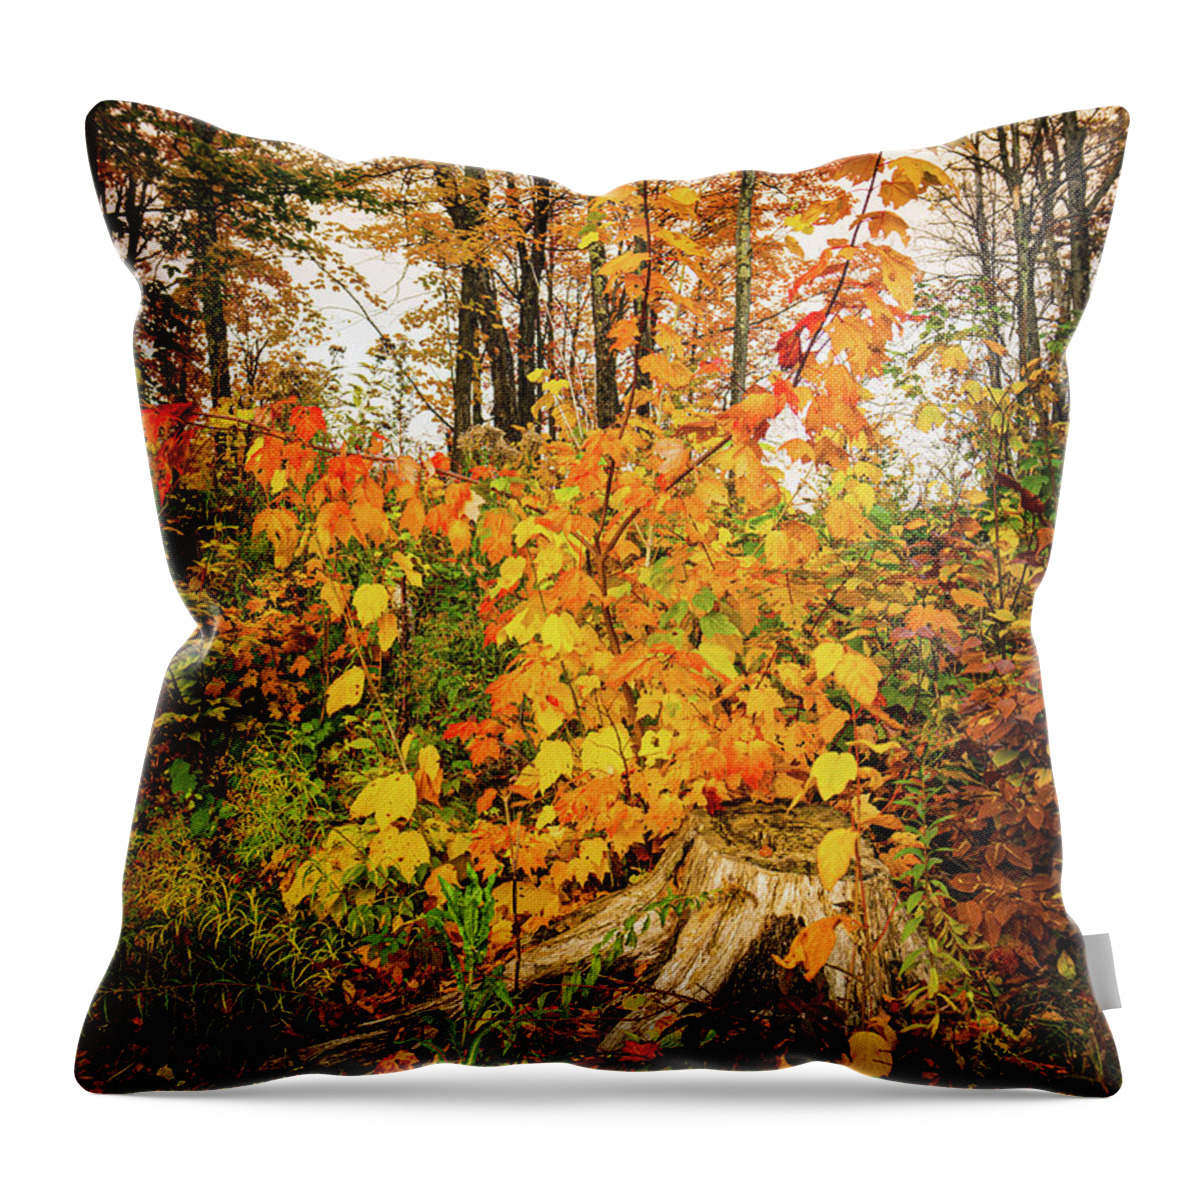 Fall Throw Pillow featuring the photograph Vermont Autumn Forest Renewal by Ron Long Ltd Photography